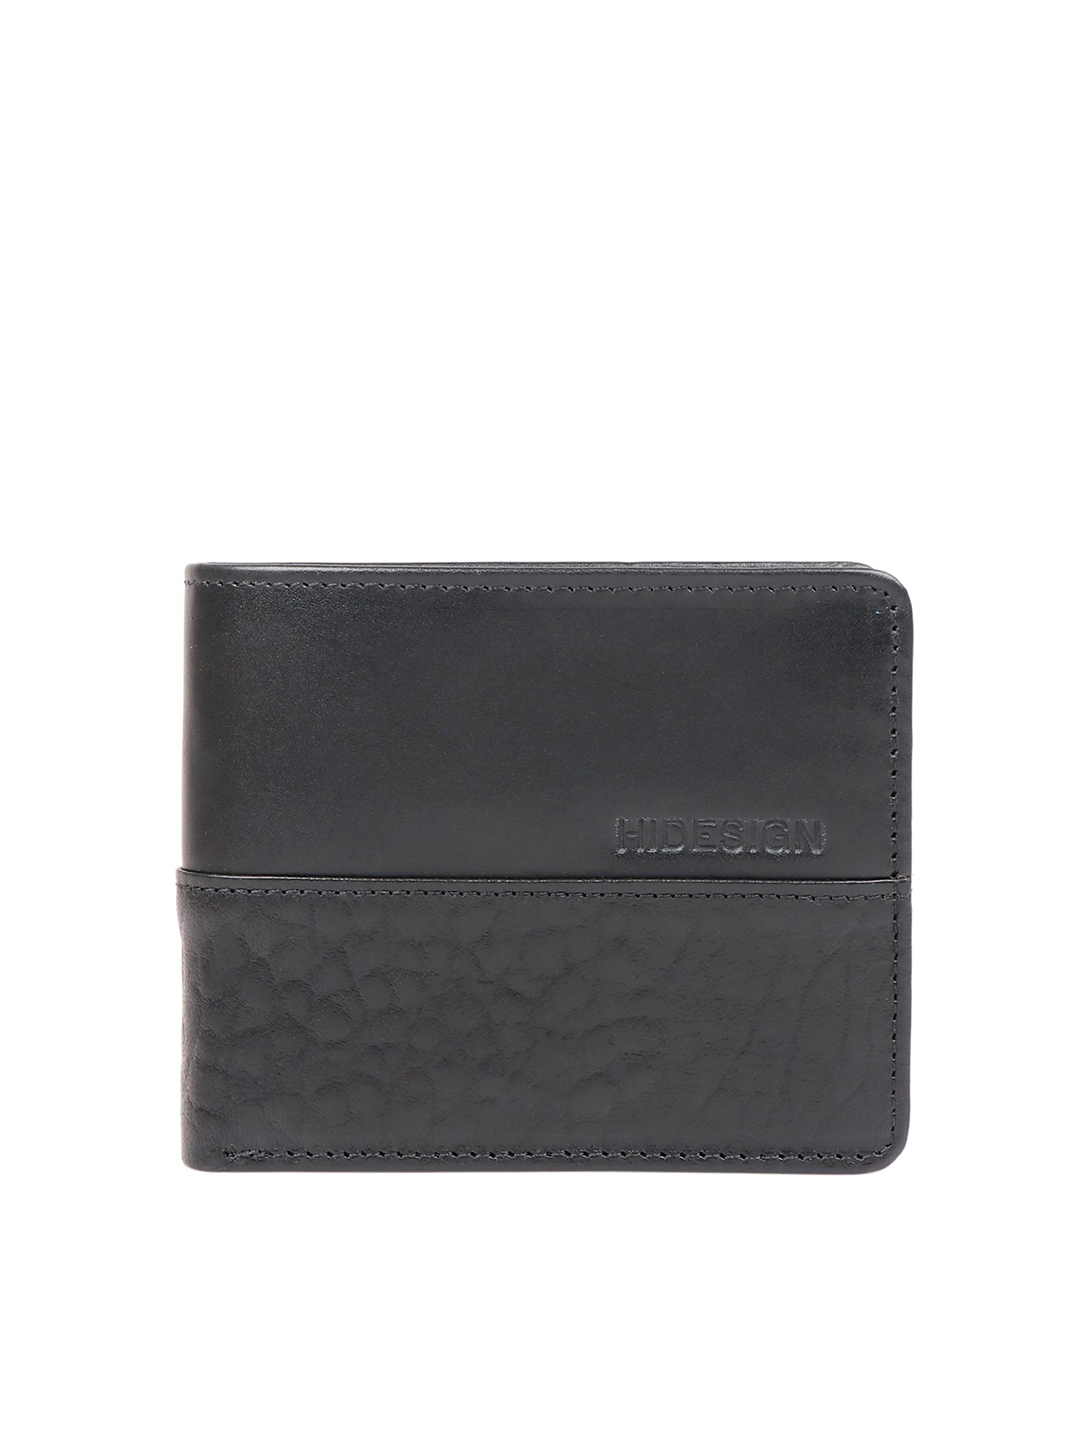 Buy Hidesign Men Black Textured Leather Two Fold Wallet - Wallets for ...